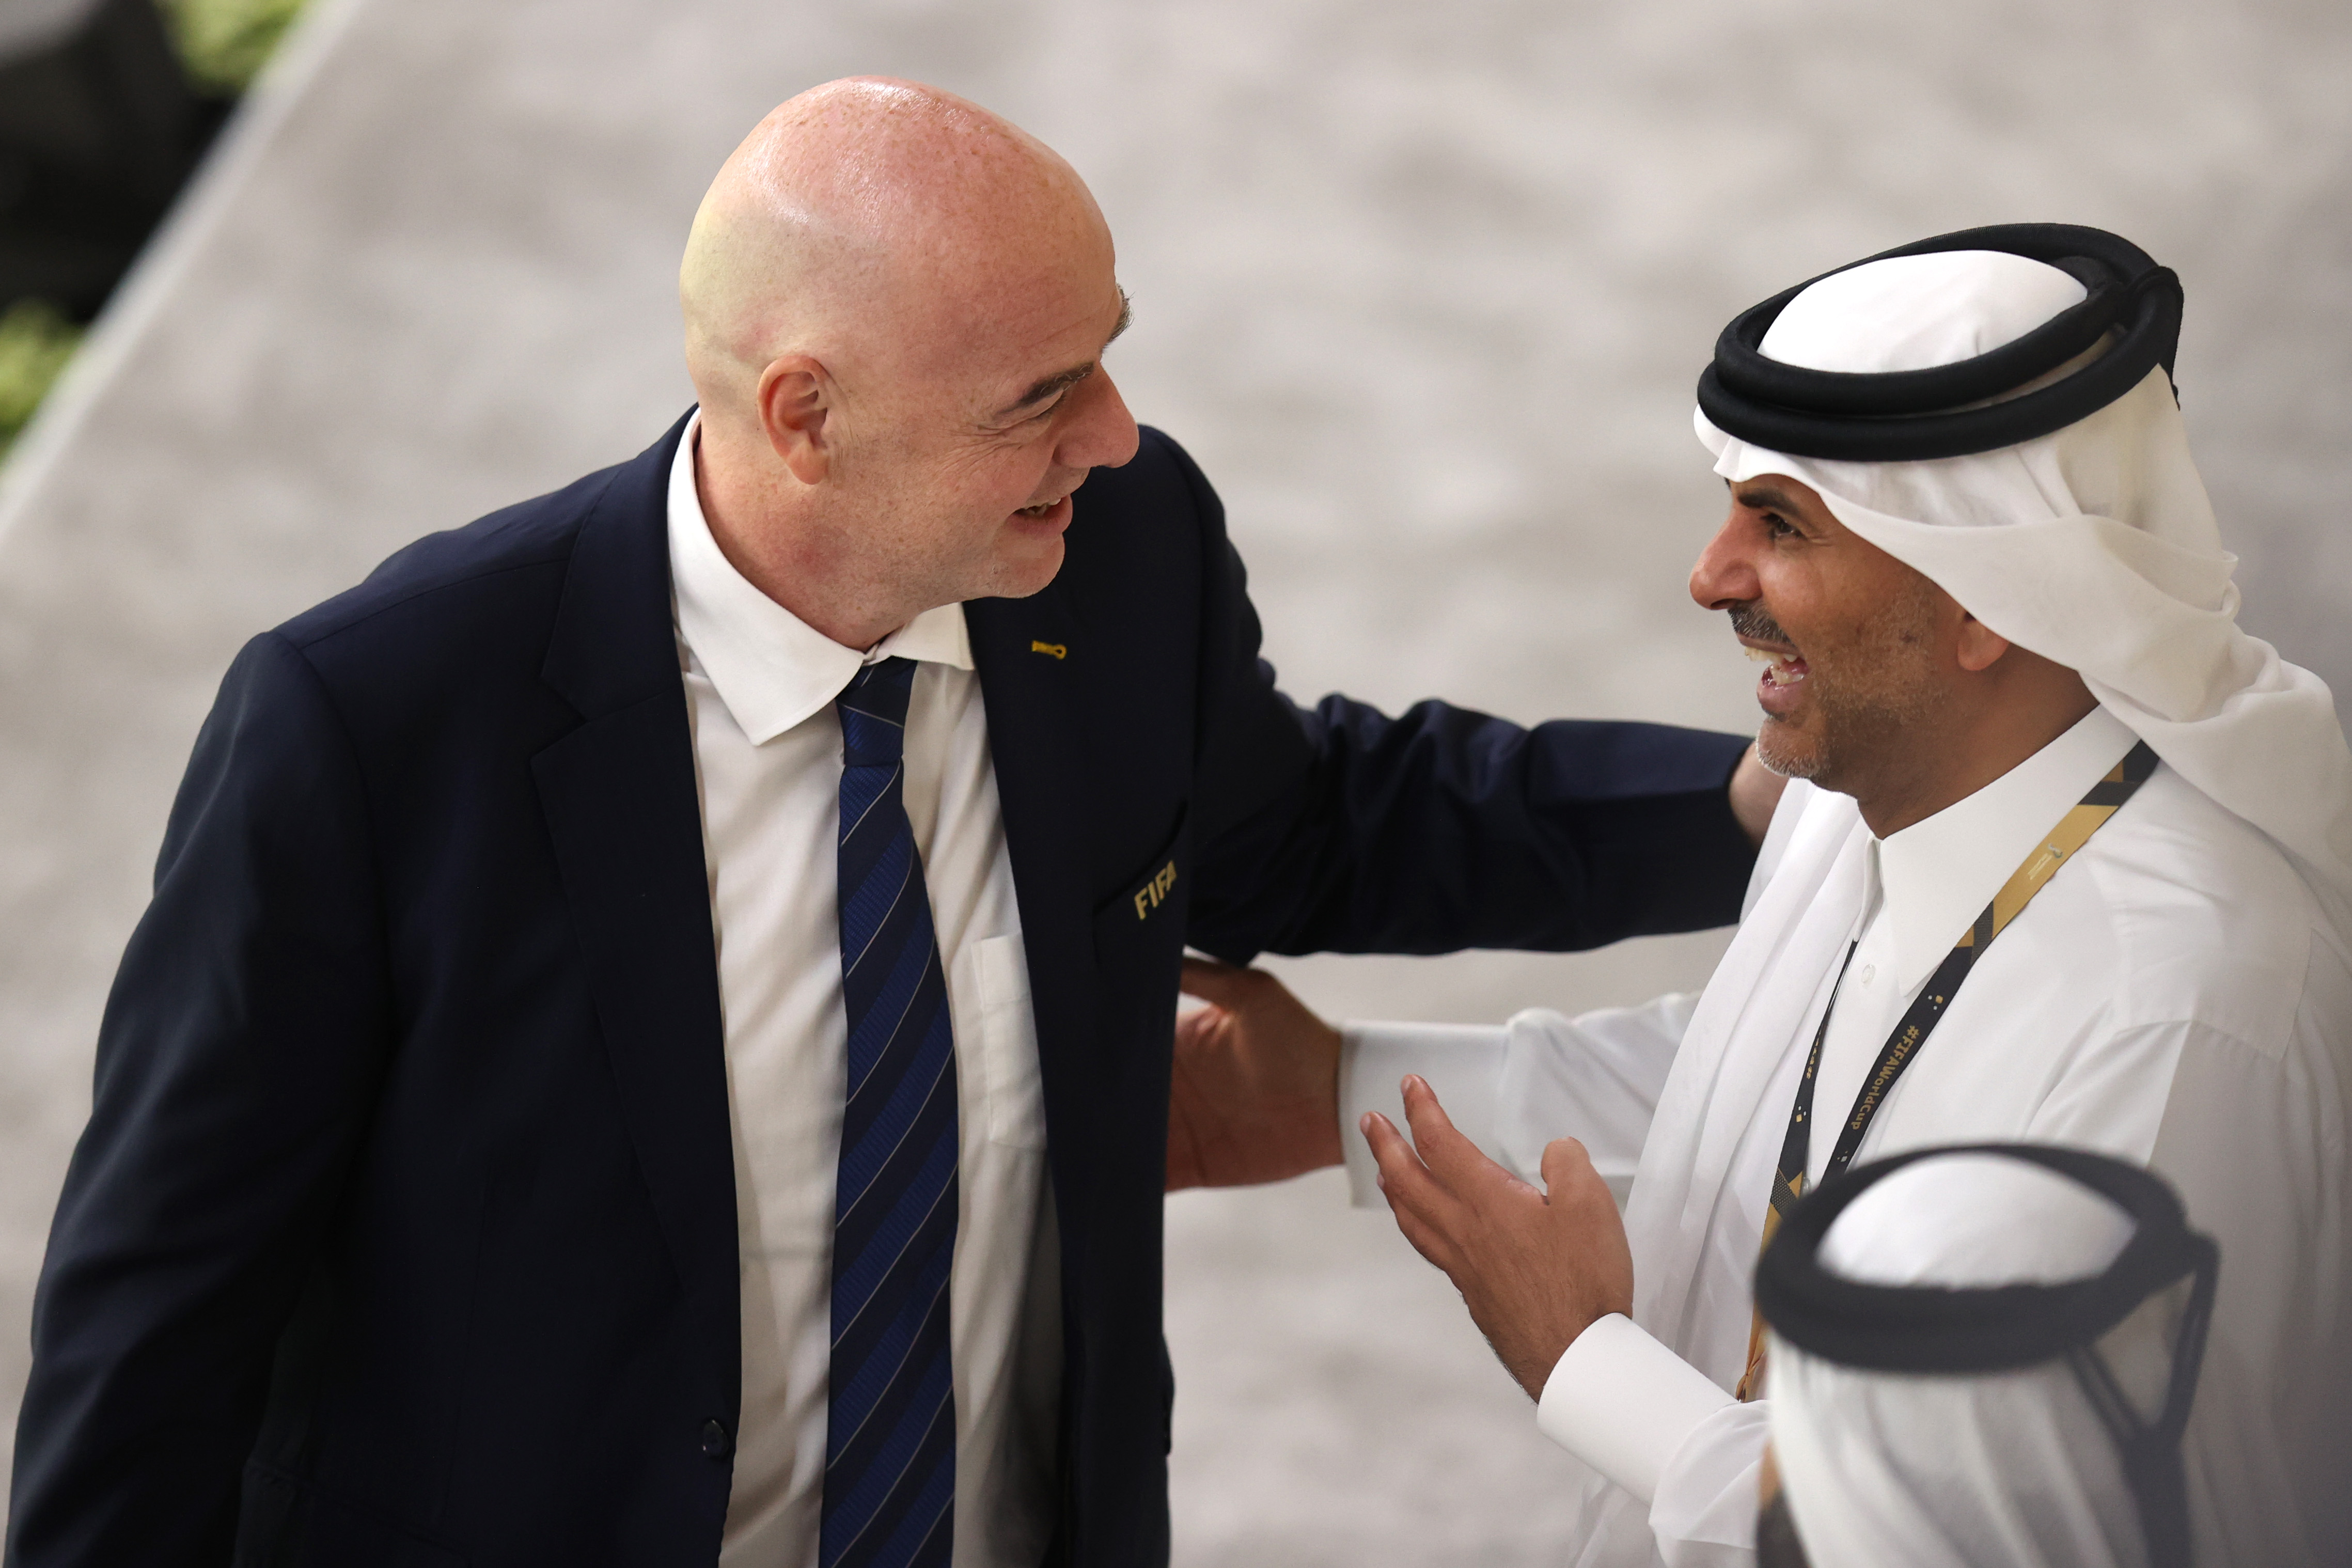 FIFA President Gianni Infantino during the opening game in Qatar 2022 between the host nation and Ecuador.